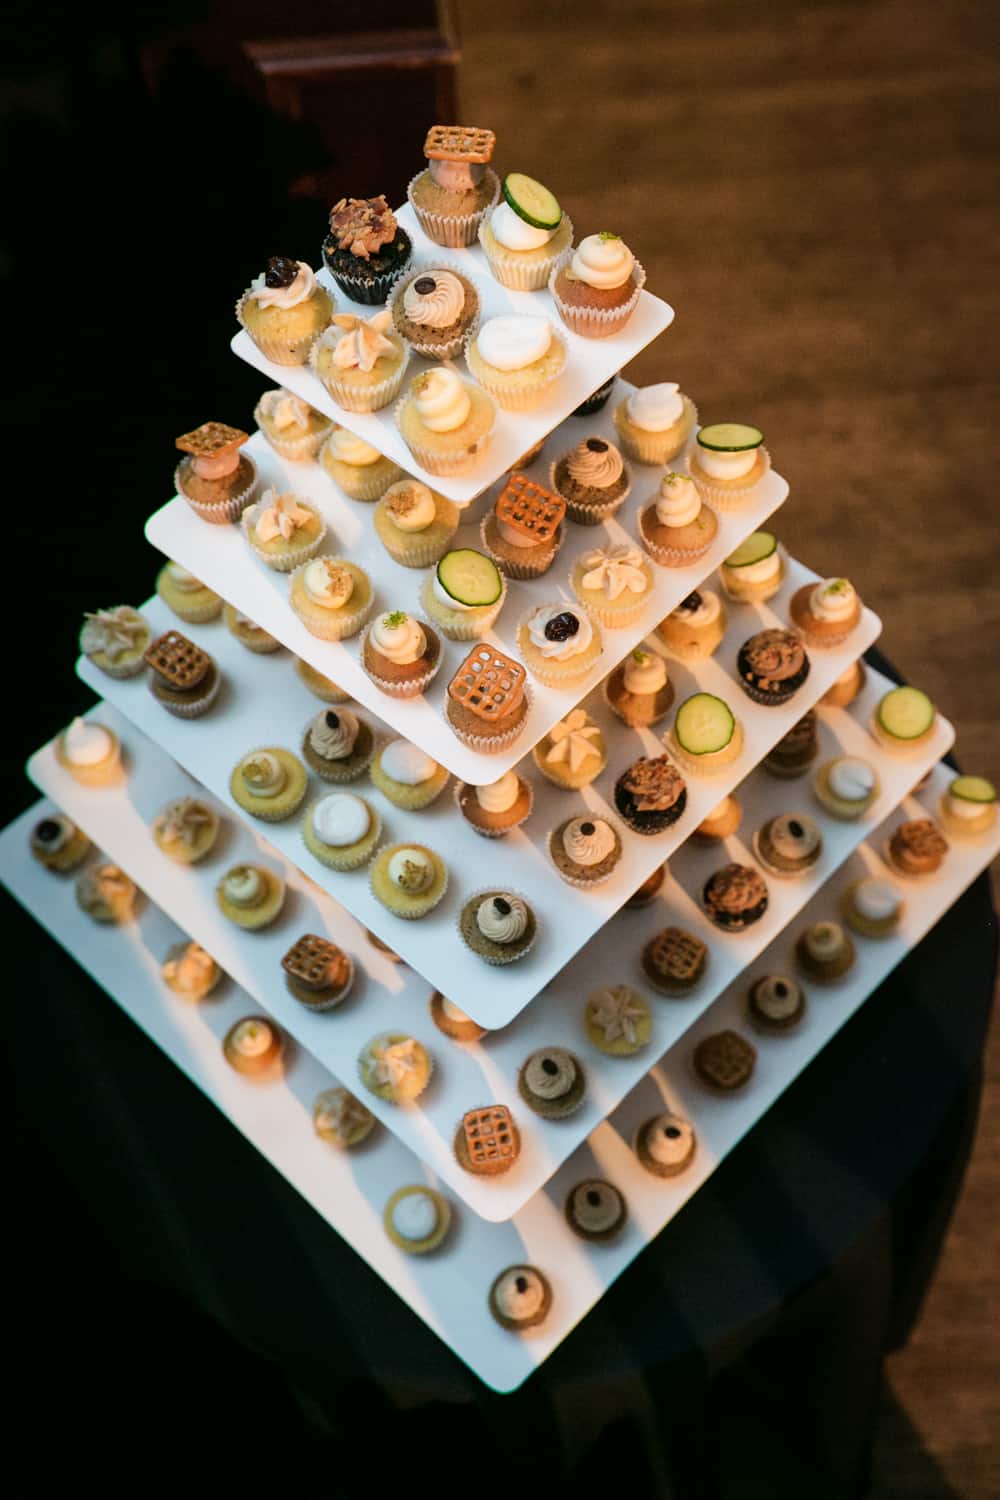 Tower of cupcakes from Prohibition Bakery